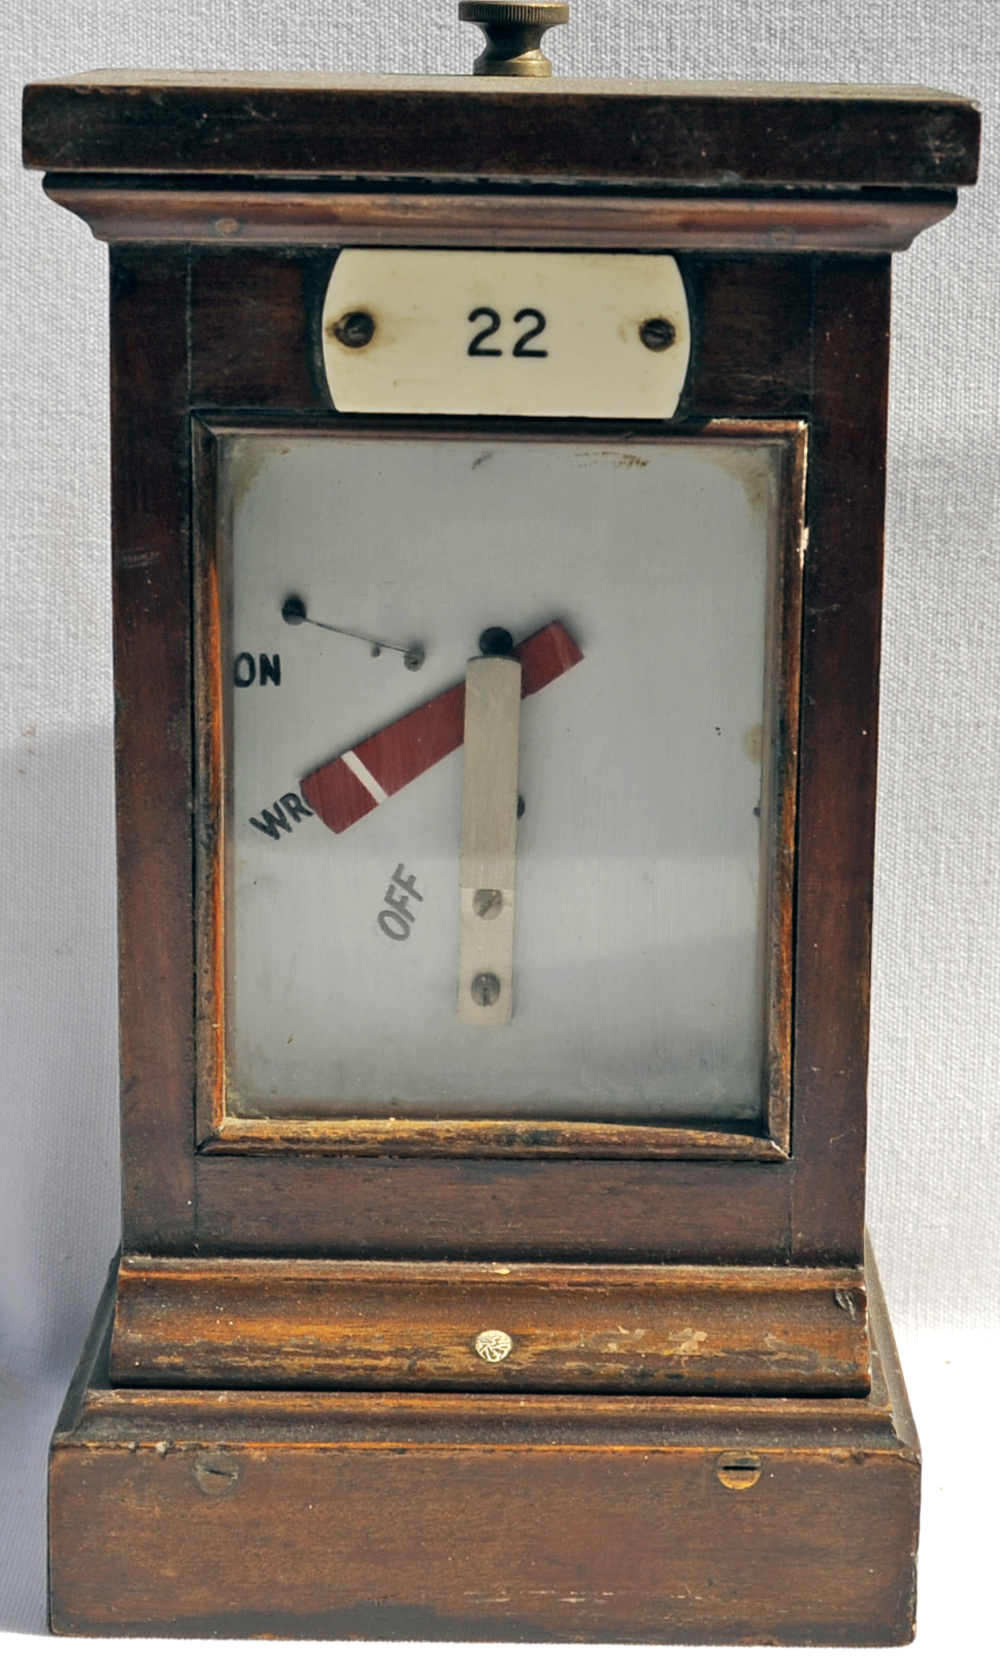 GWR wood cased Home Signal Repeater manufactured by H. White & Co., London. Plated No 22 above the